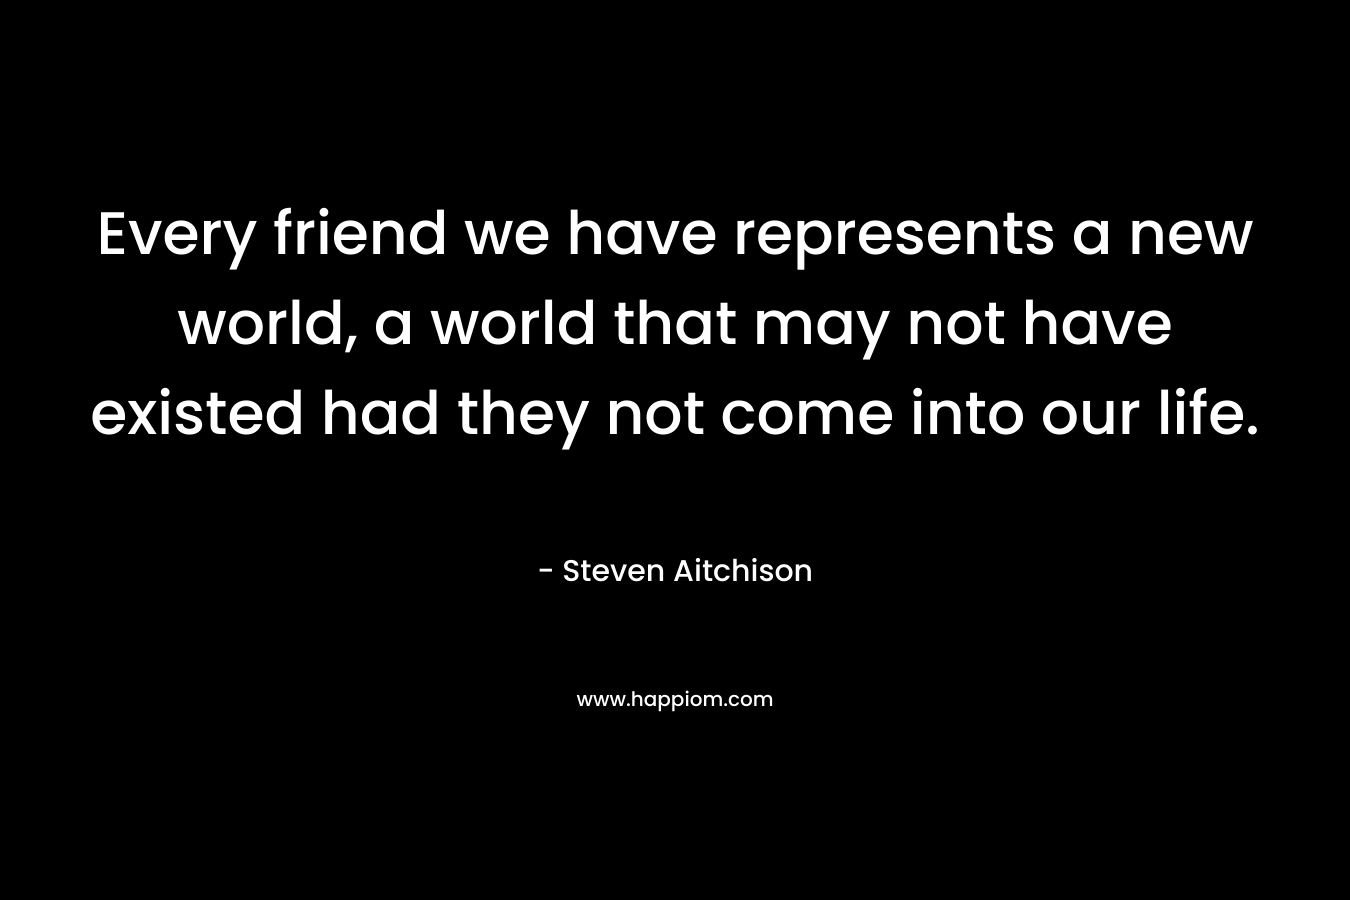 Every friend we have represents a new world, a world that may not have existed had they not come into our life.